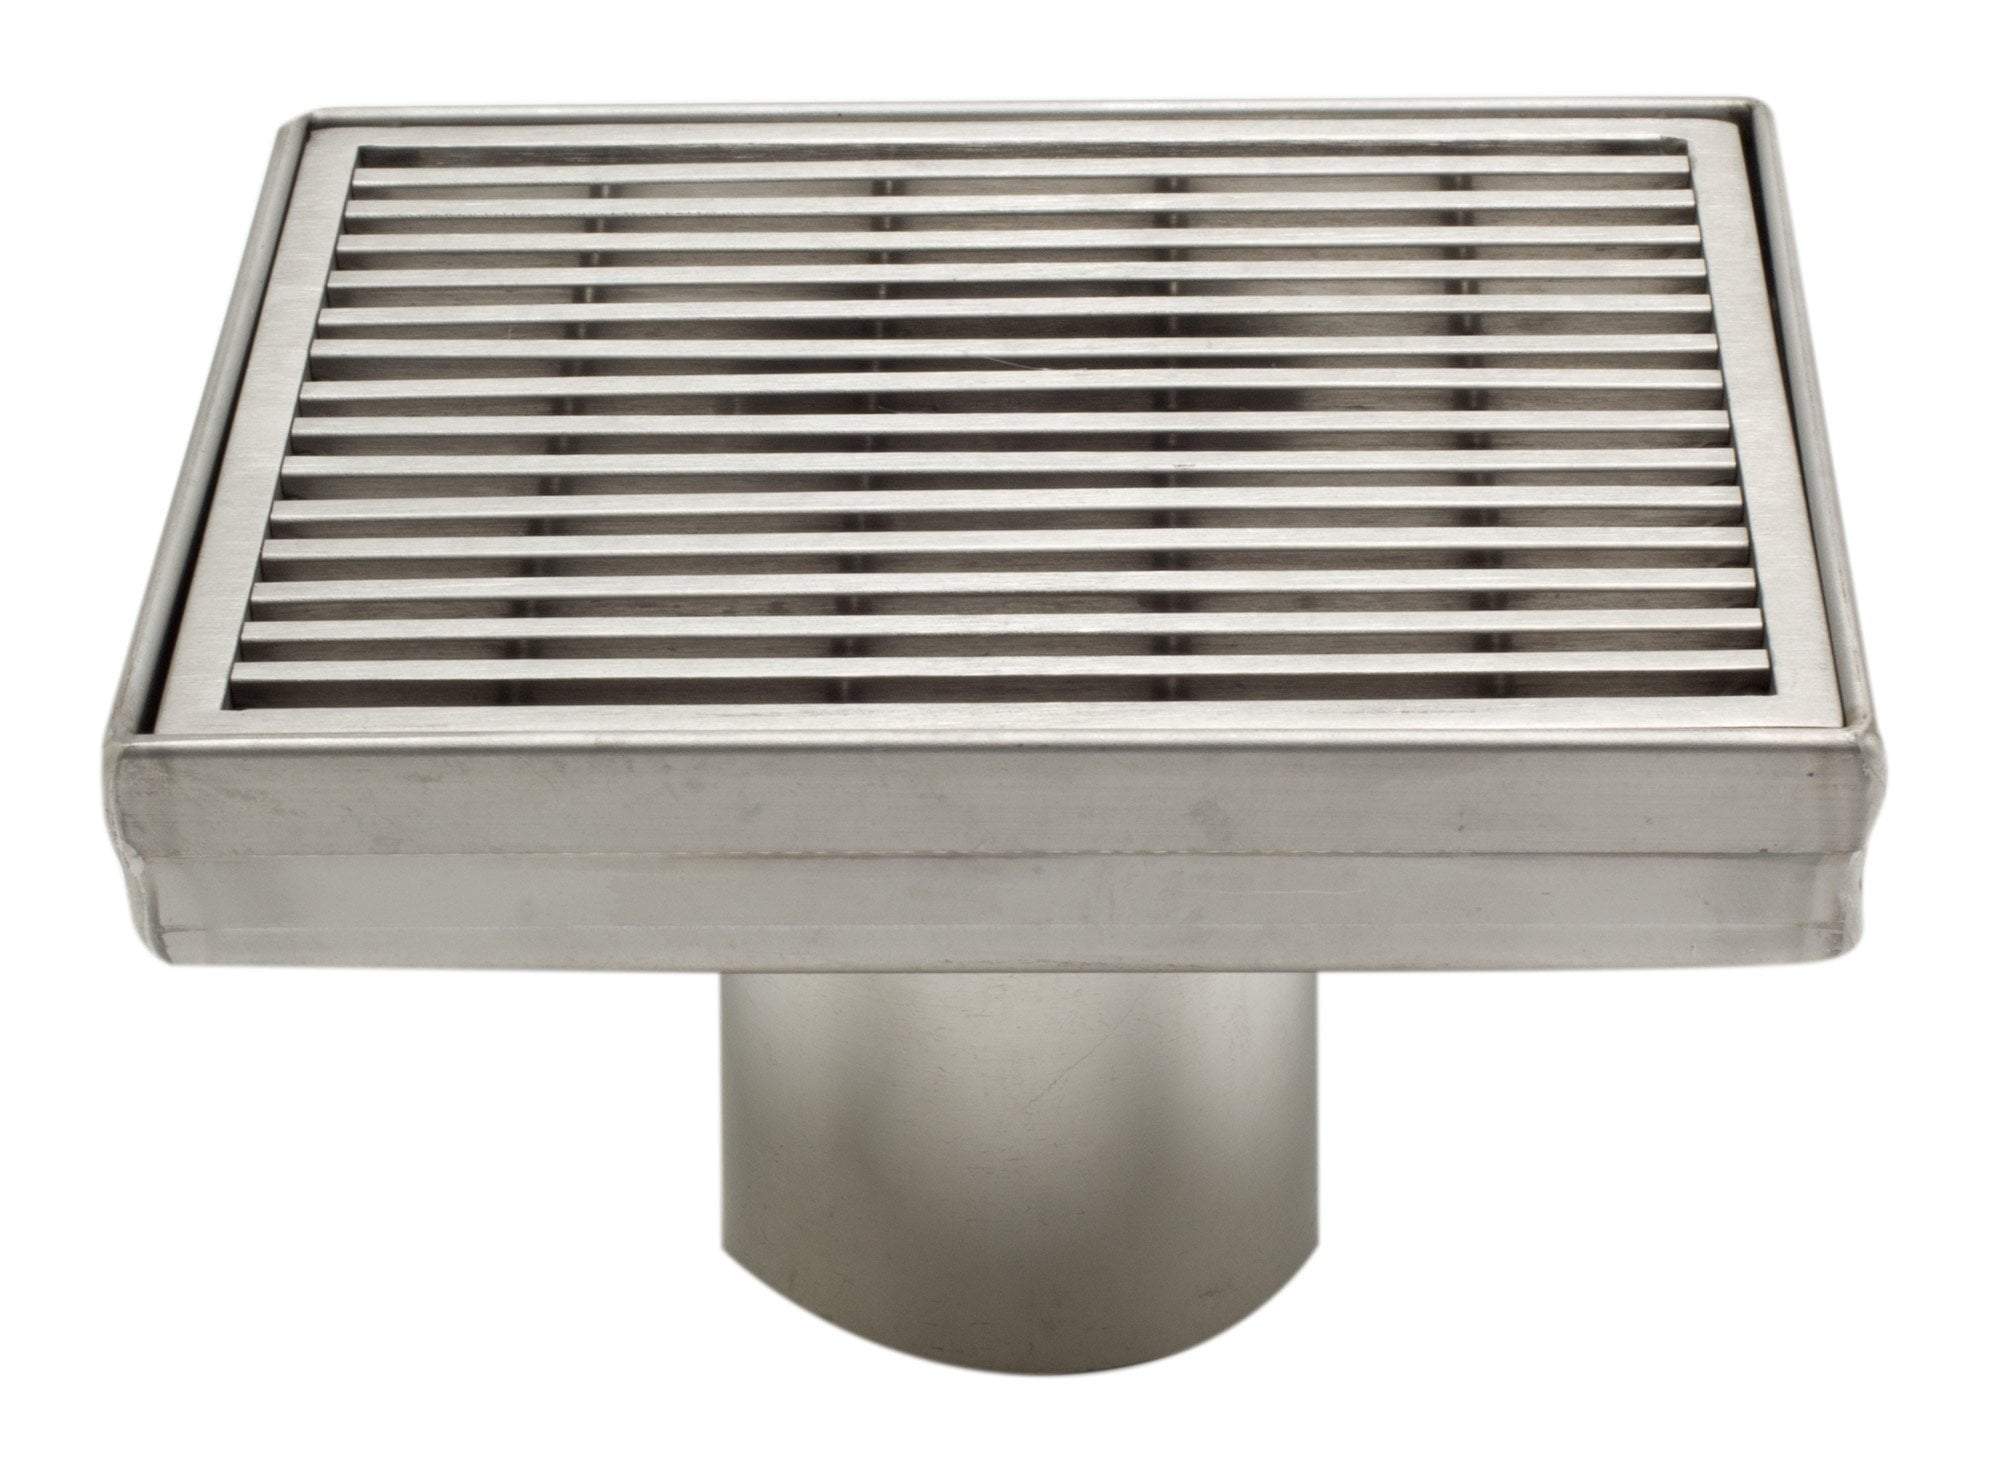 5" x 5" Square Stainless Steel Shower Drain with Groove Lines